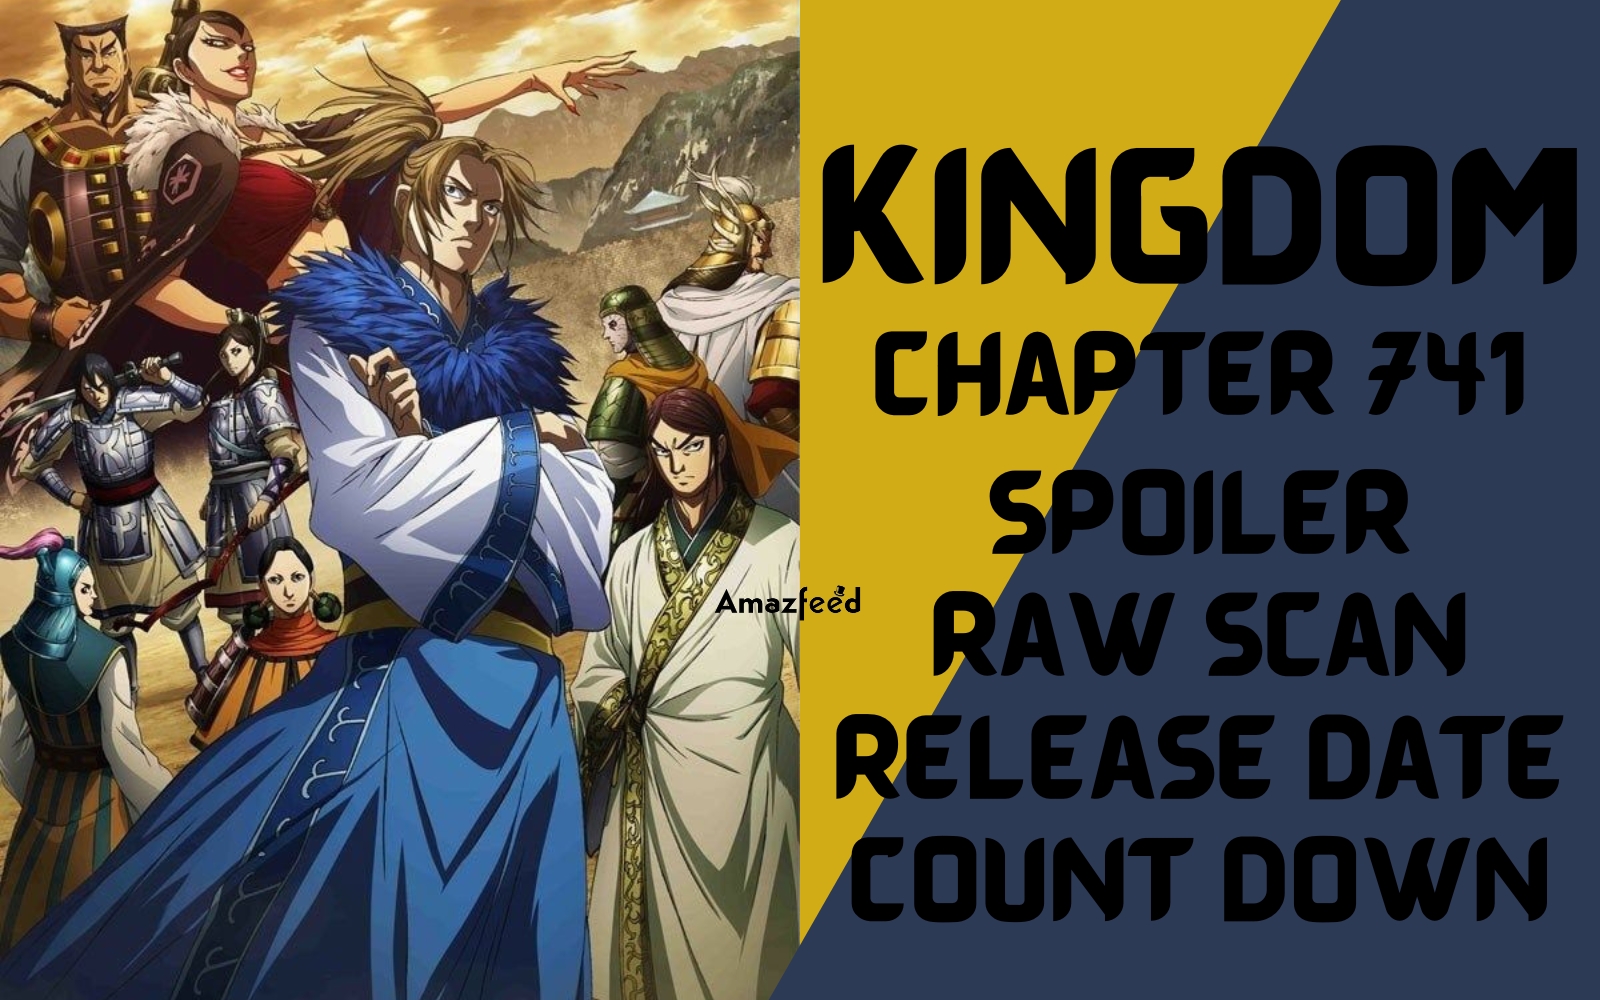 Kingdom Chapter 741 Spoiler, Raw Scan, Release Date, Countdown